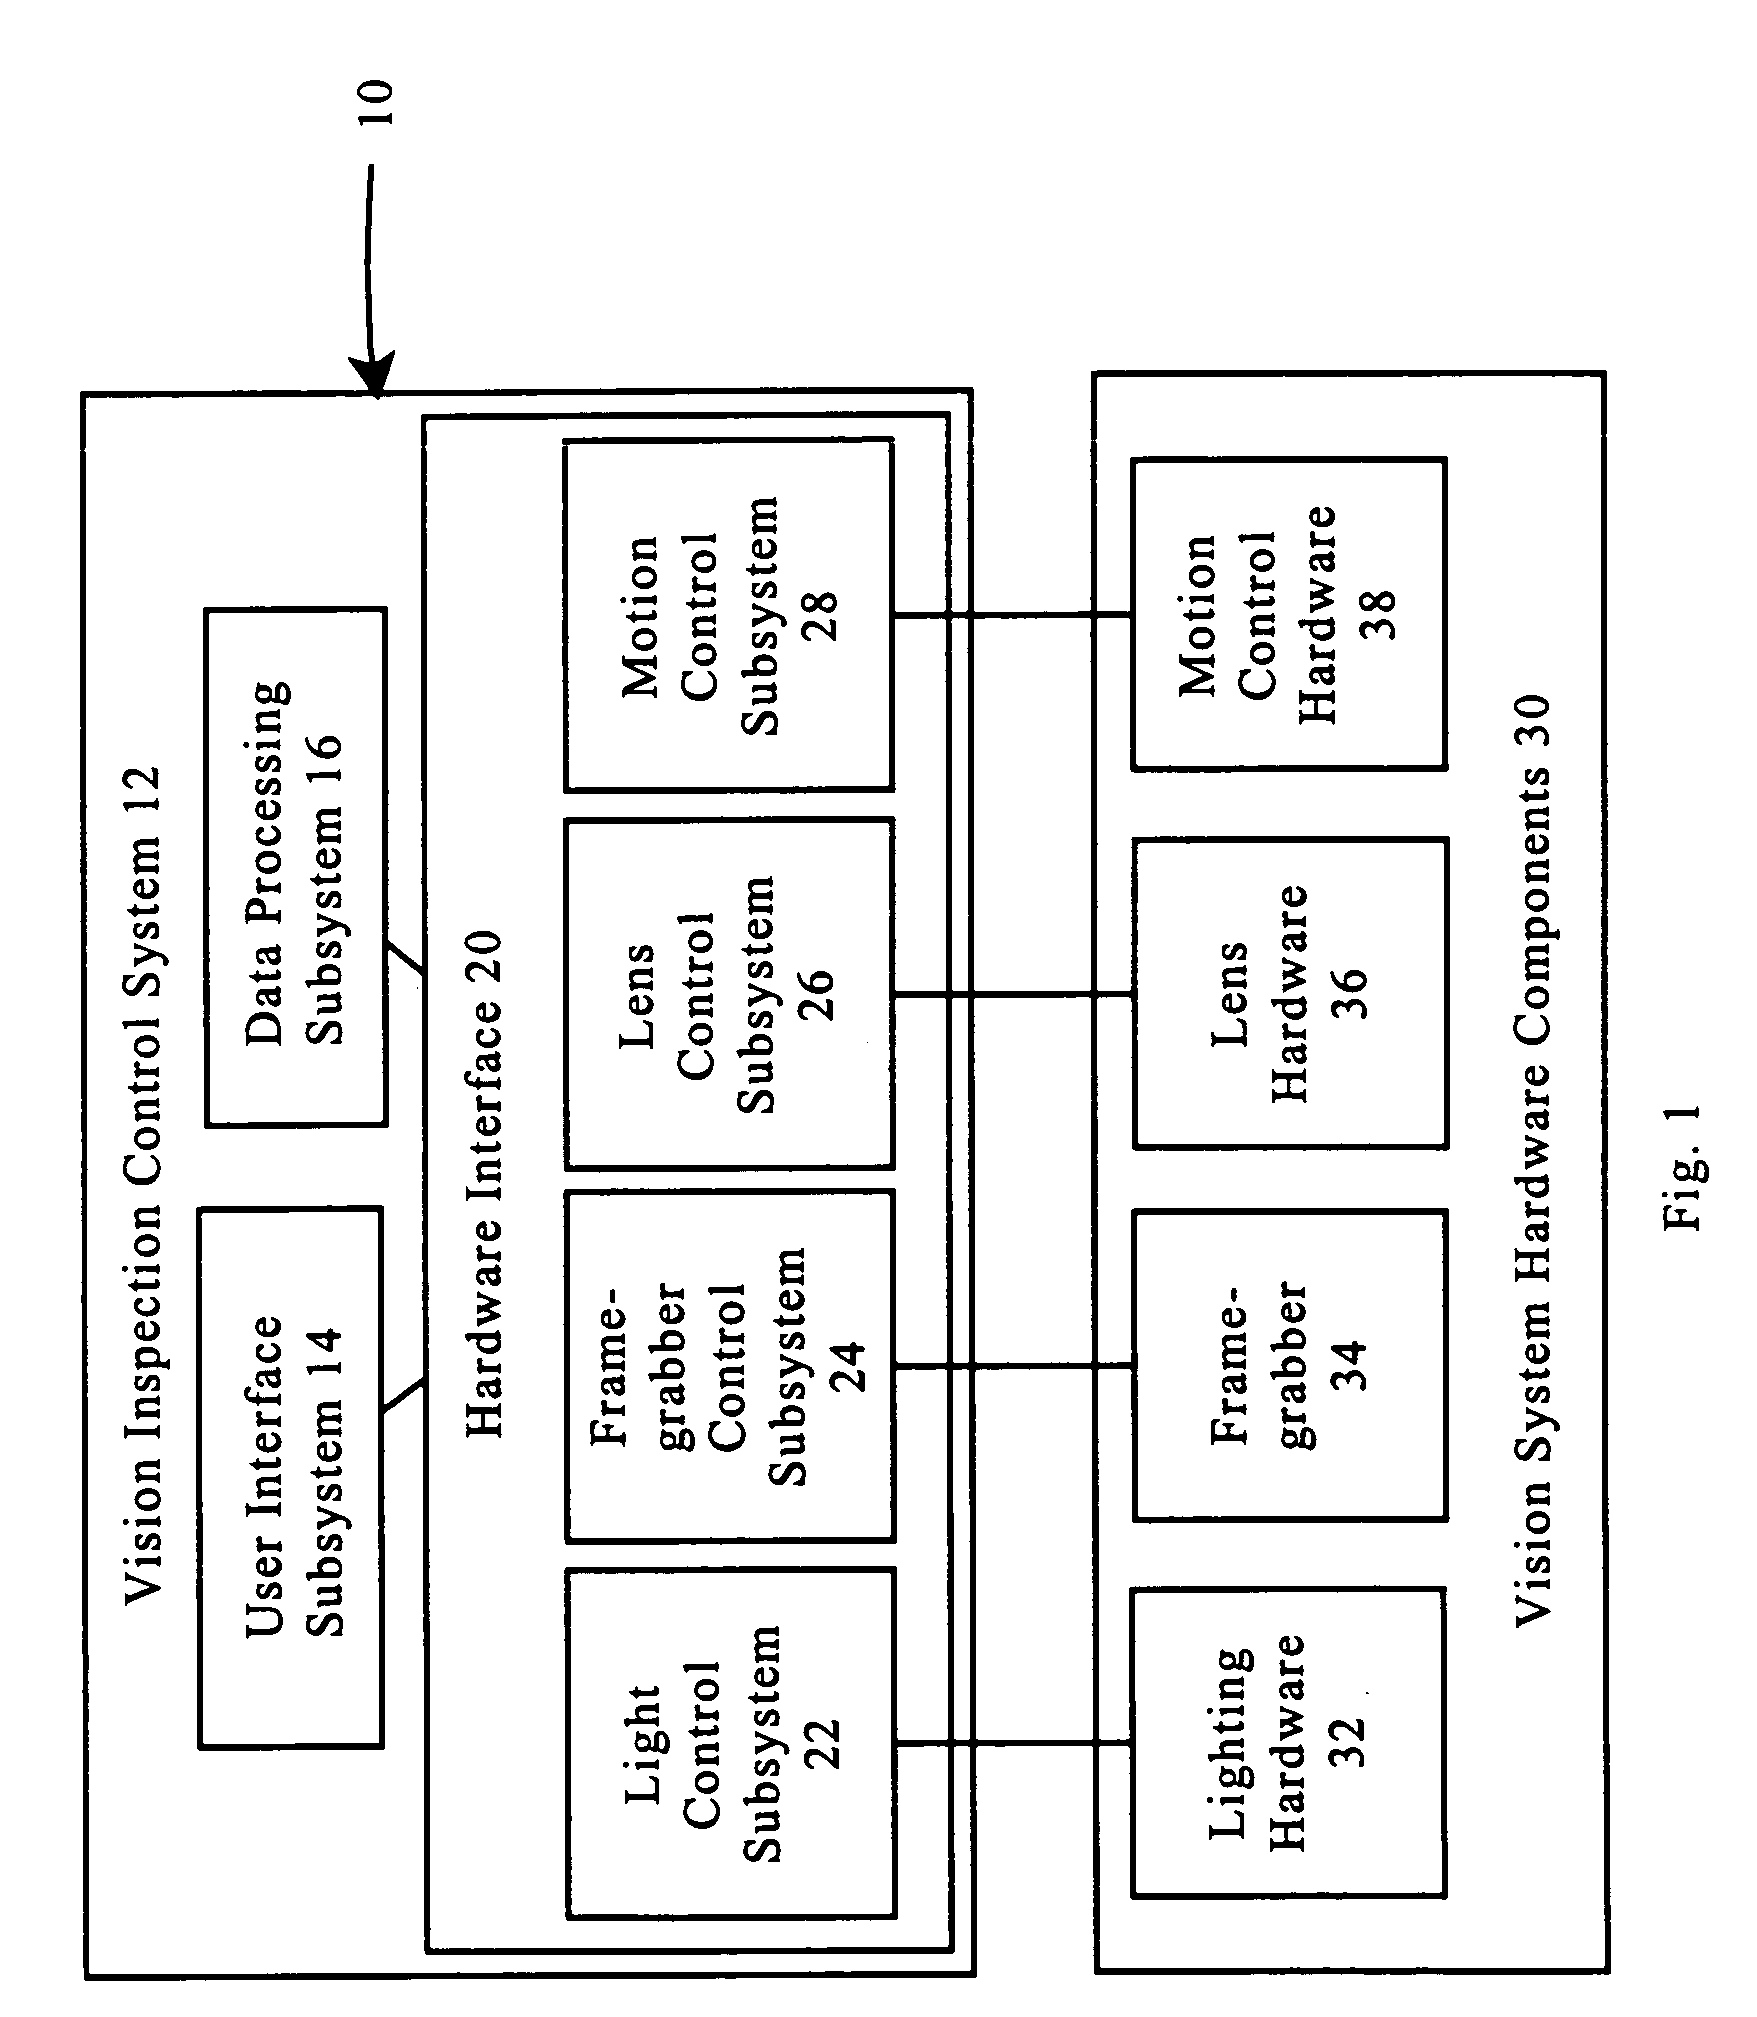 Hardware simulation systems and methods for vision inspection systems